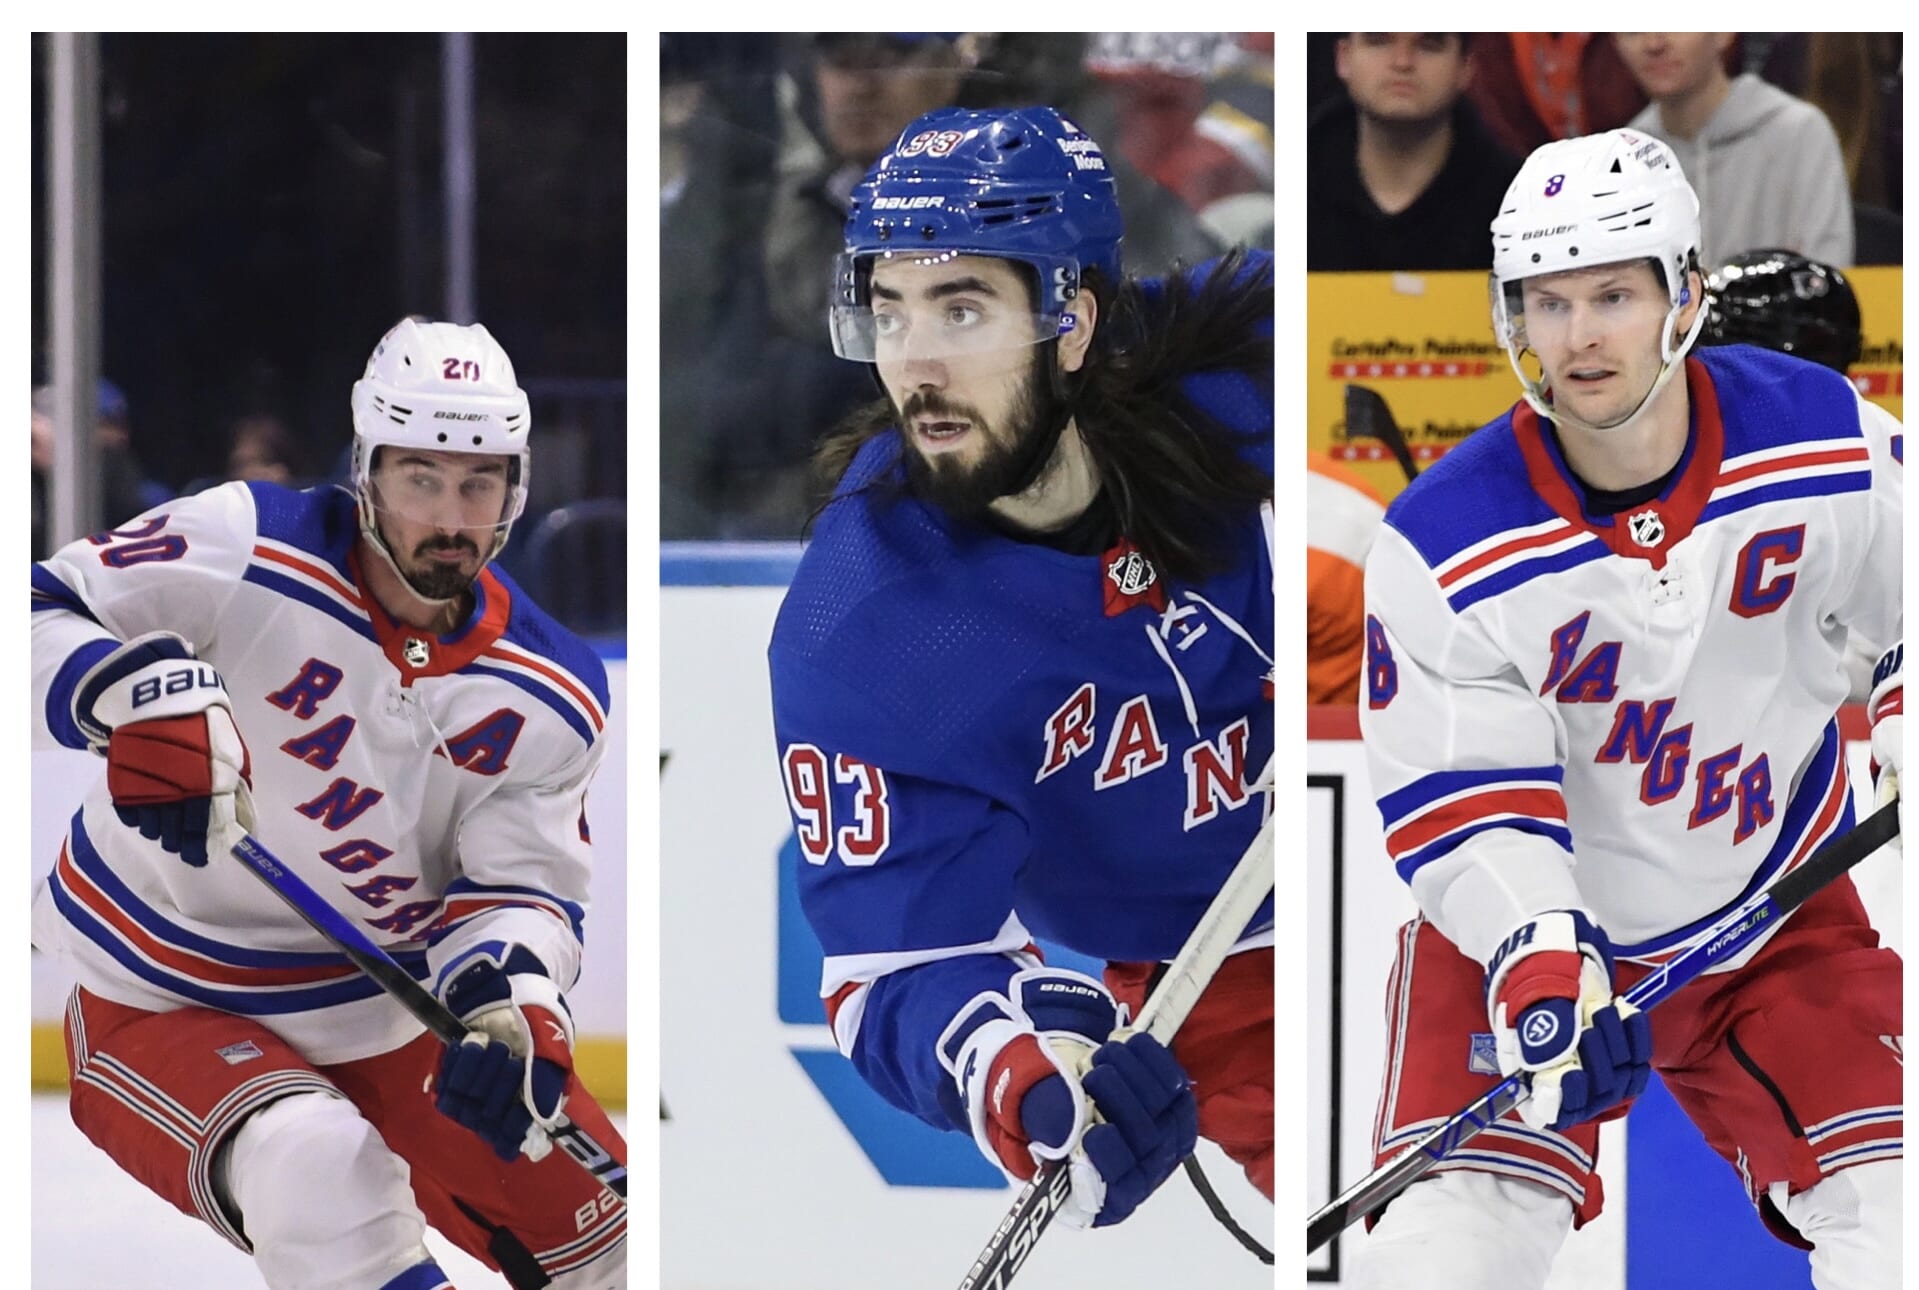 Several New York Rangers players will play in Shoulder Check Showcase